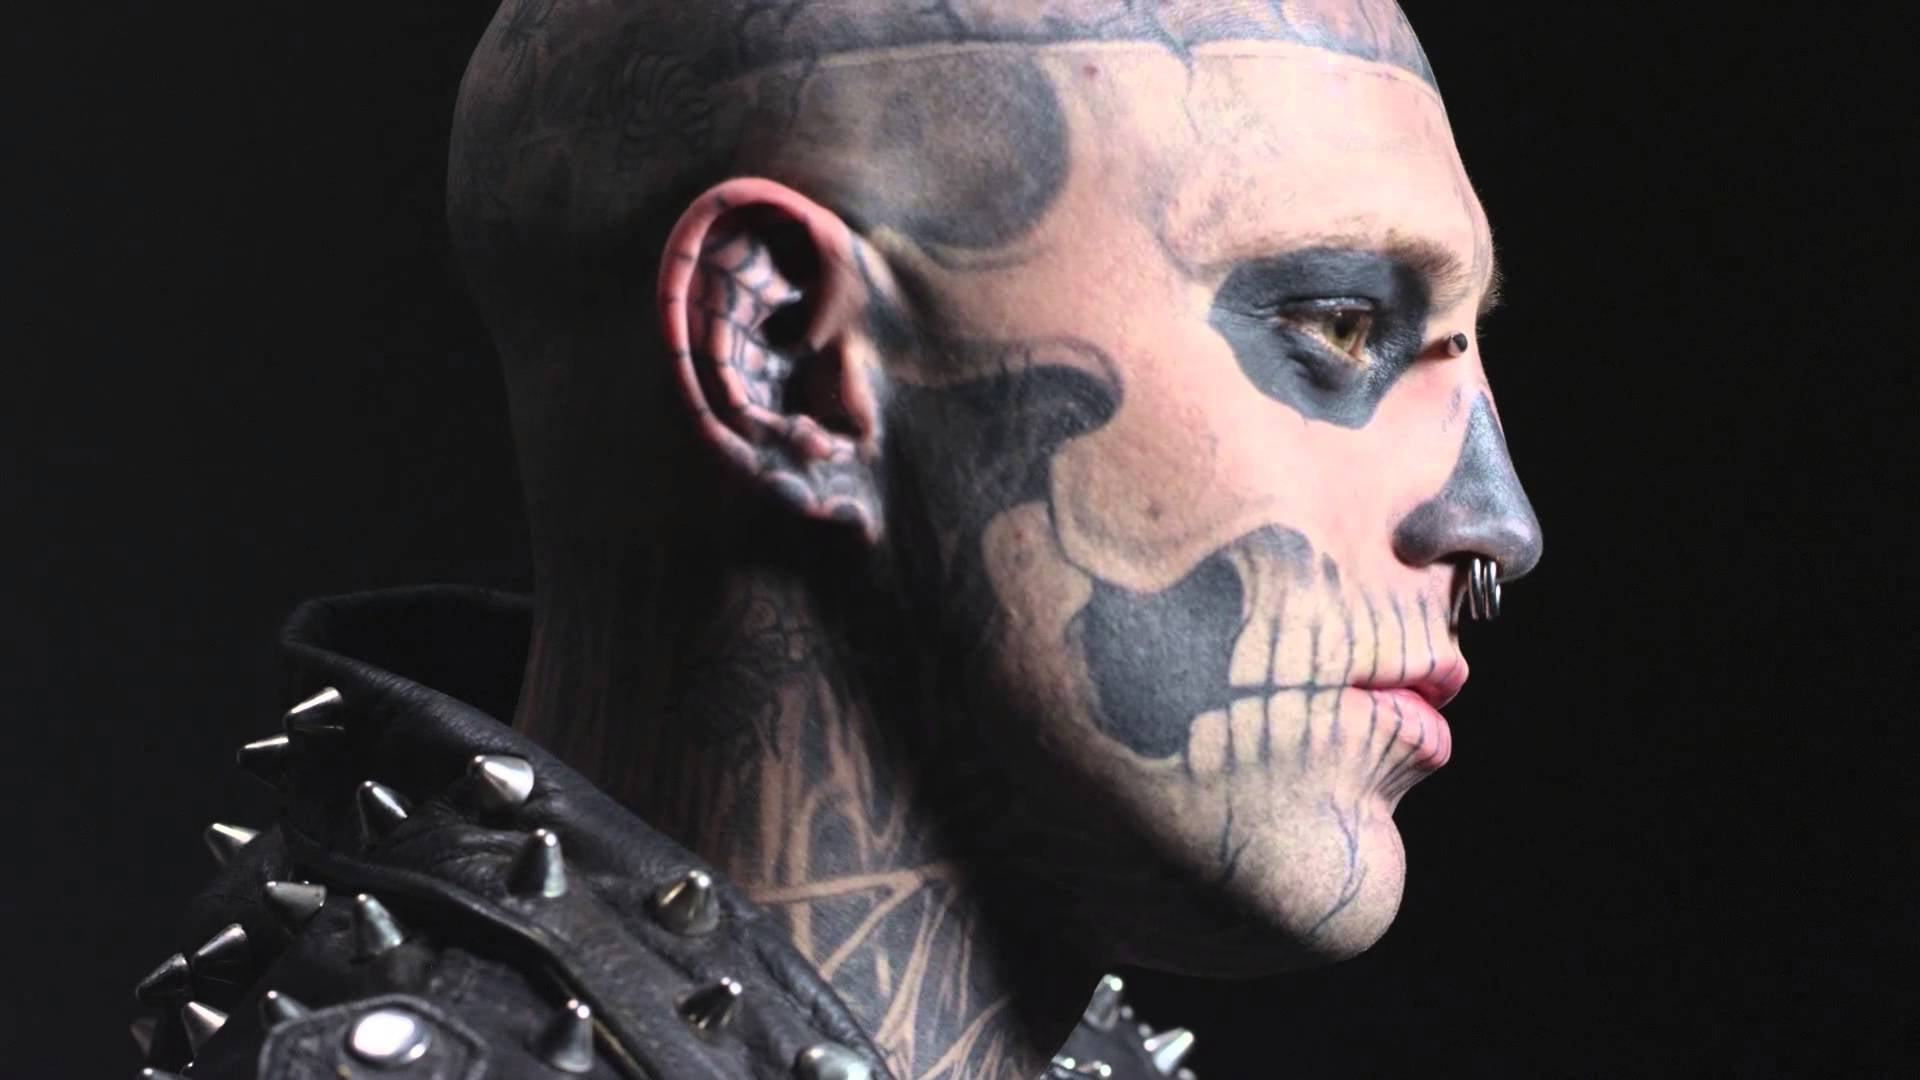 Rick Genest. All the Best Viral Videos From Dermablend in One Place